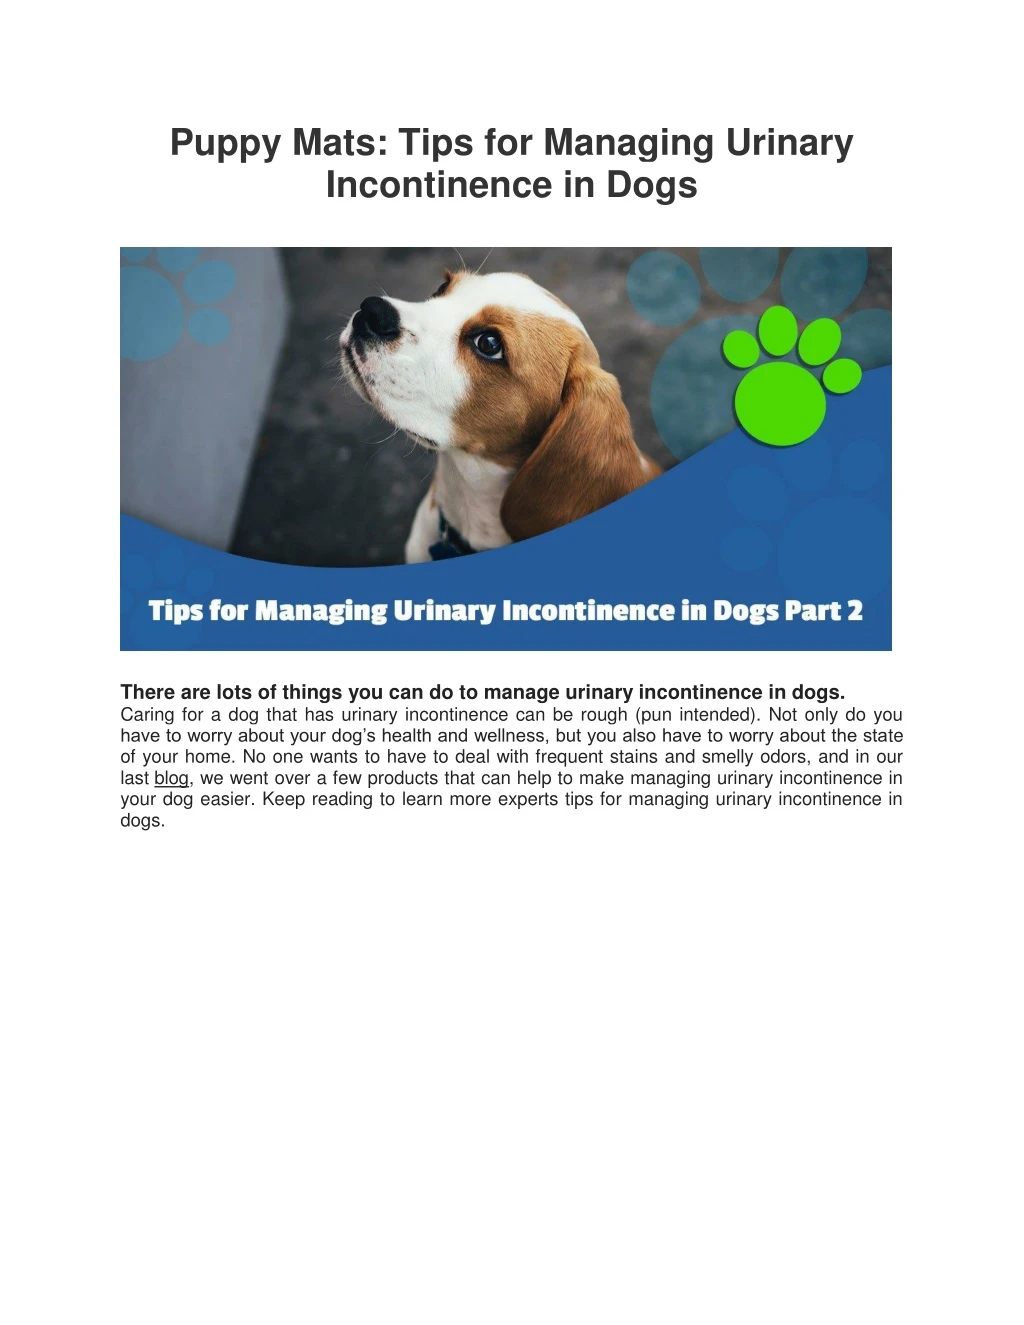 puppy mats tips for managing urinary incontinence